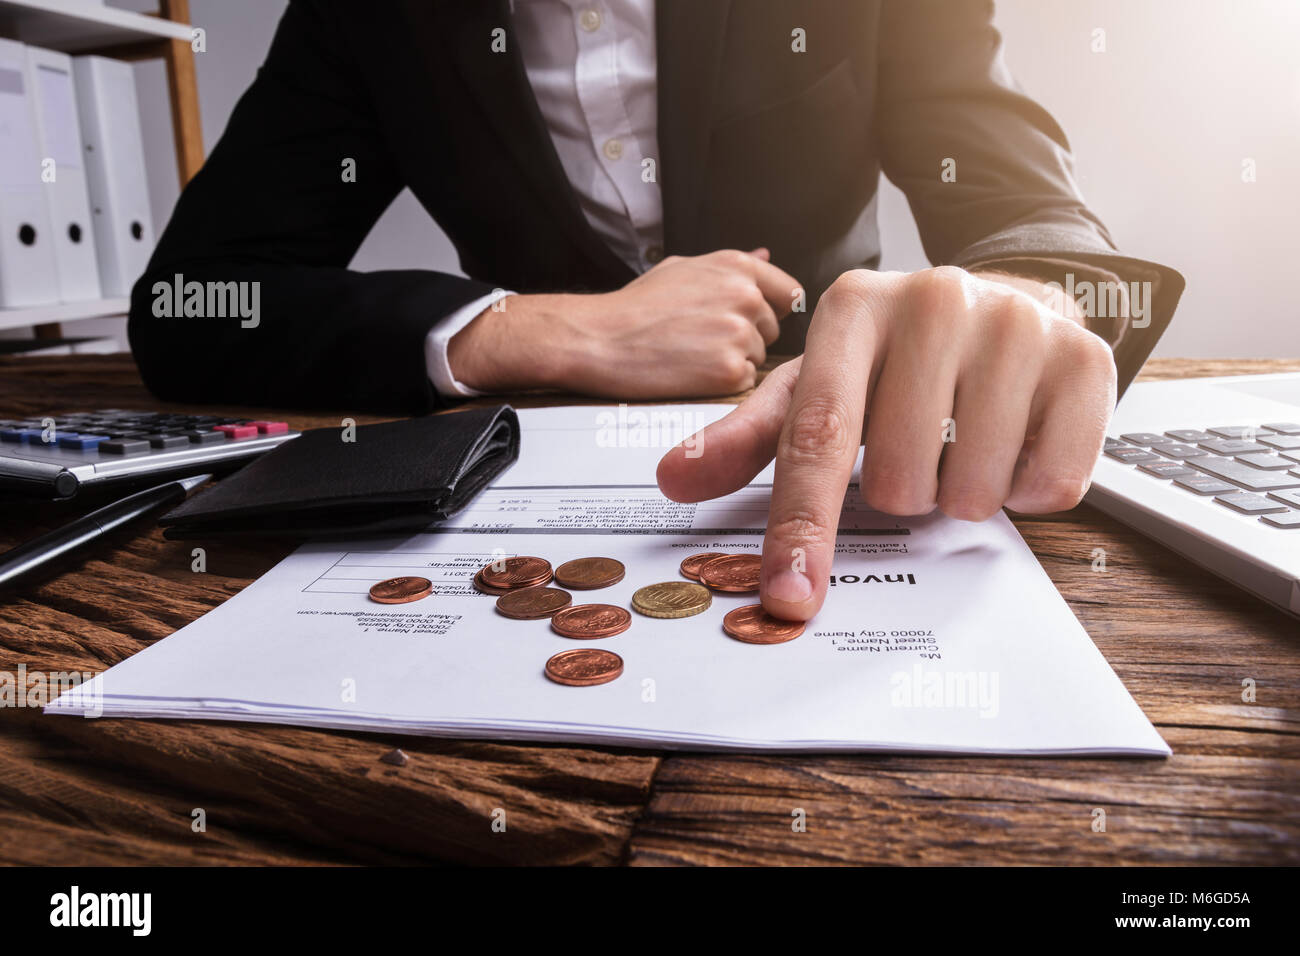 Businessperson's Hand Counting Coins With Wallet And Bill On Wooden Desk Stock Photo